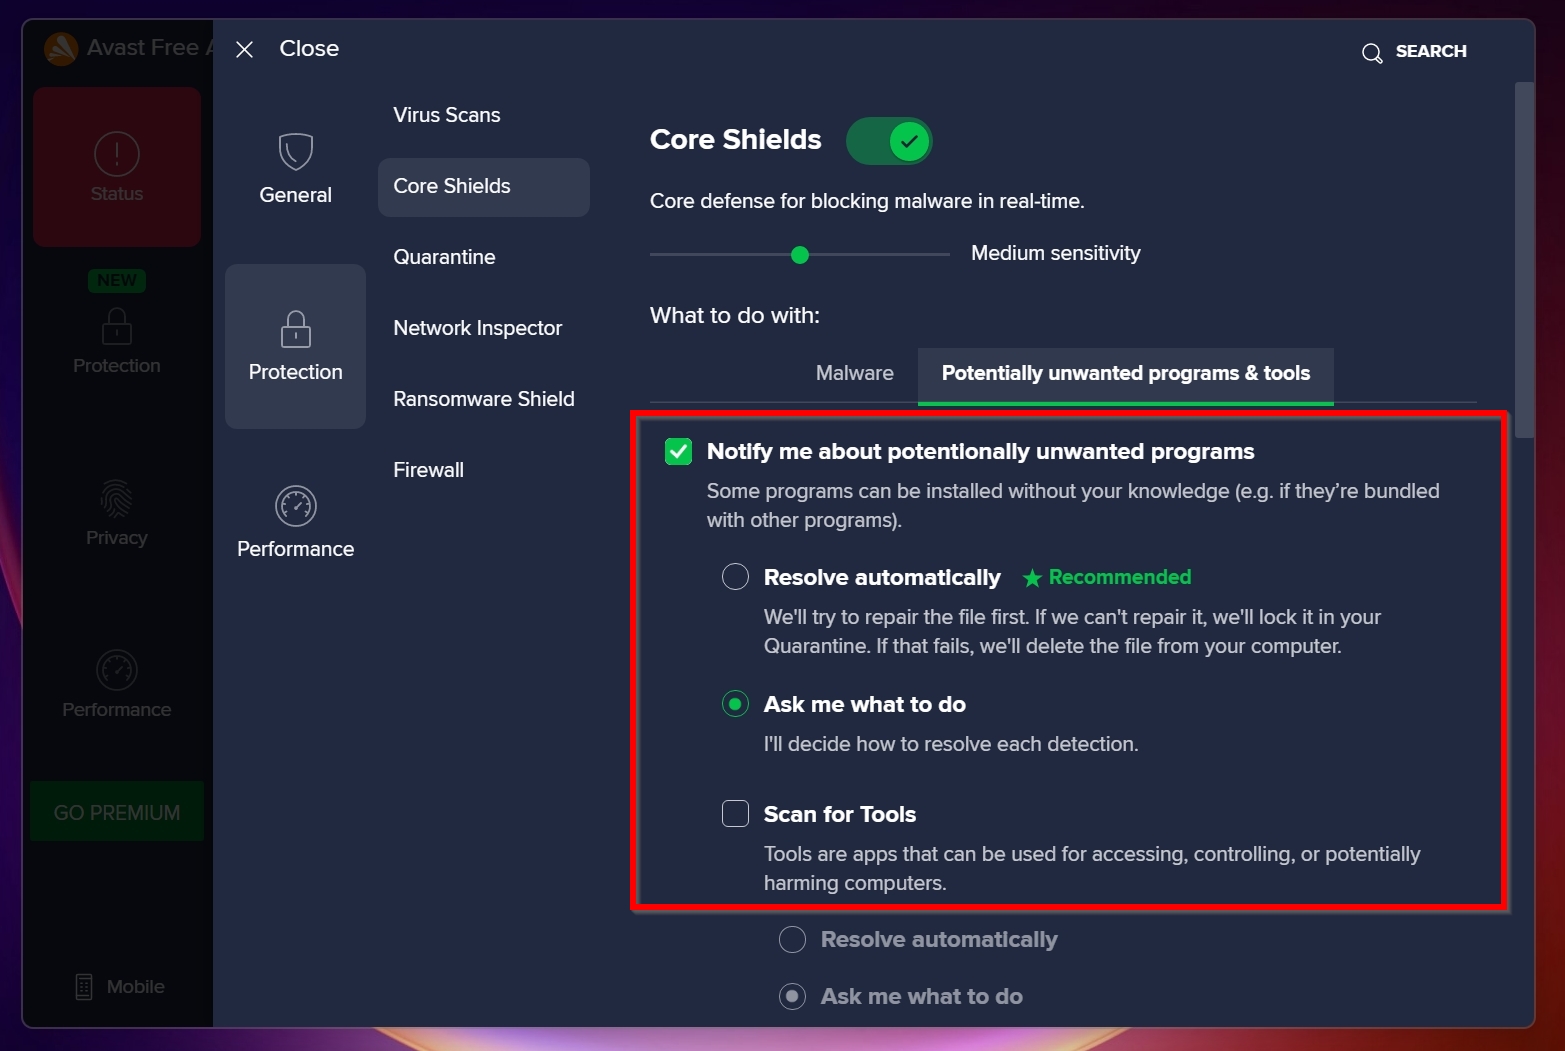 Automatic actions when potentially unwanted programs or tools are detected by Avast.